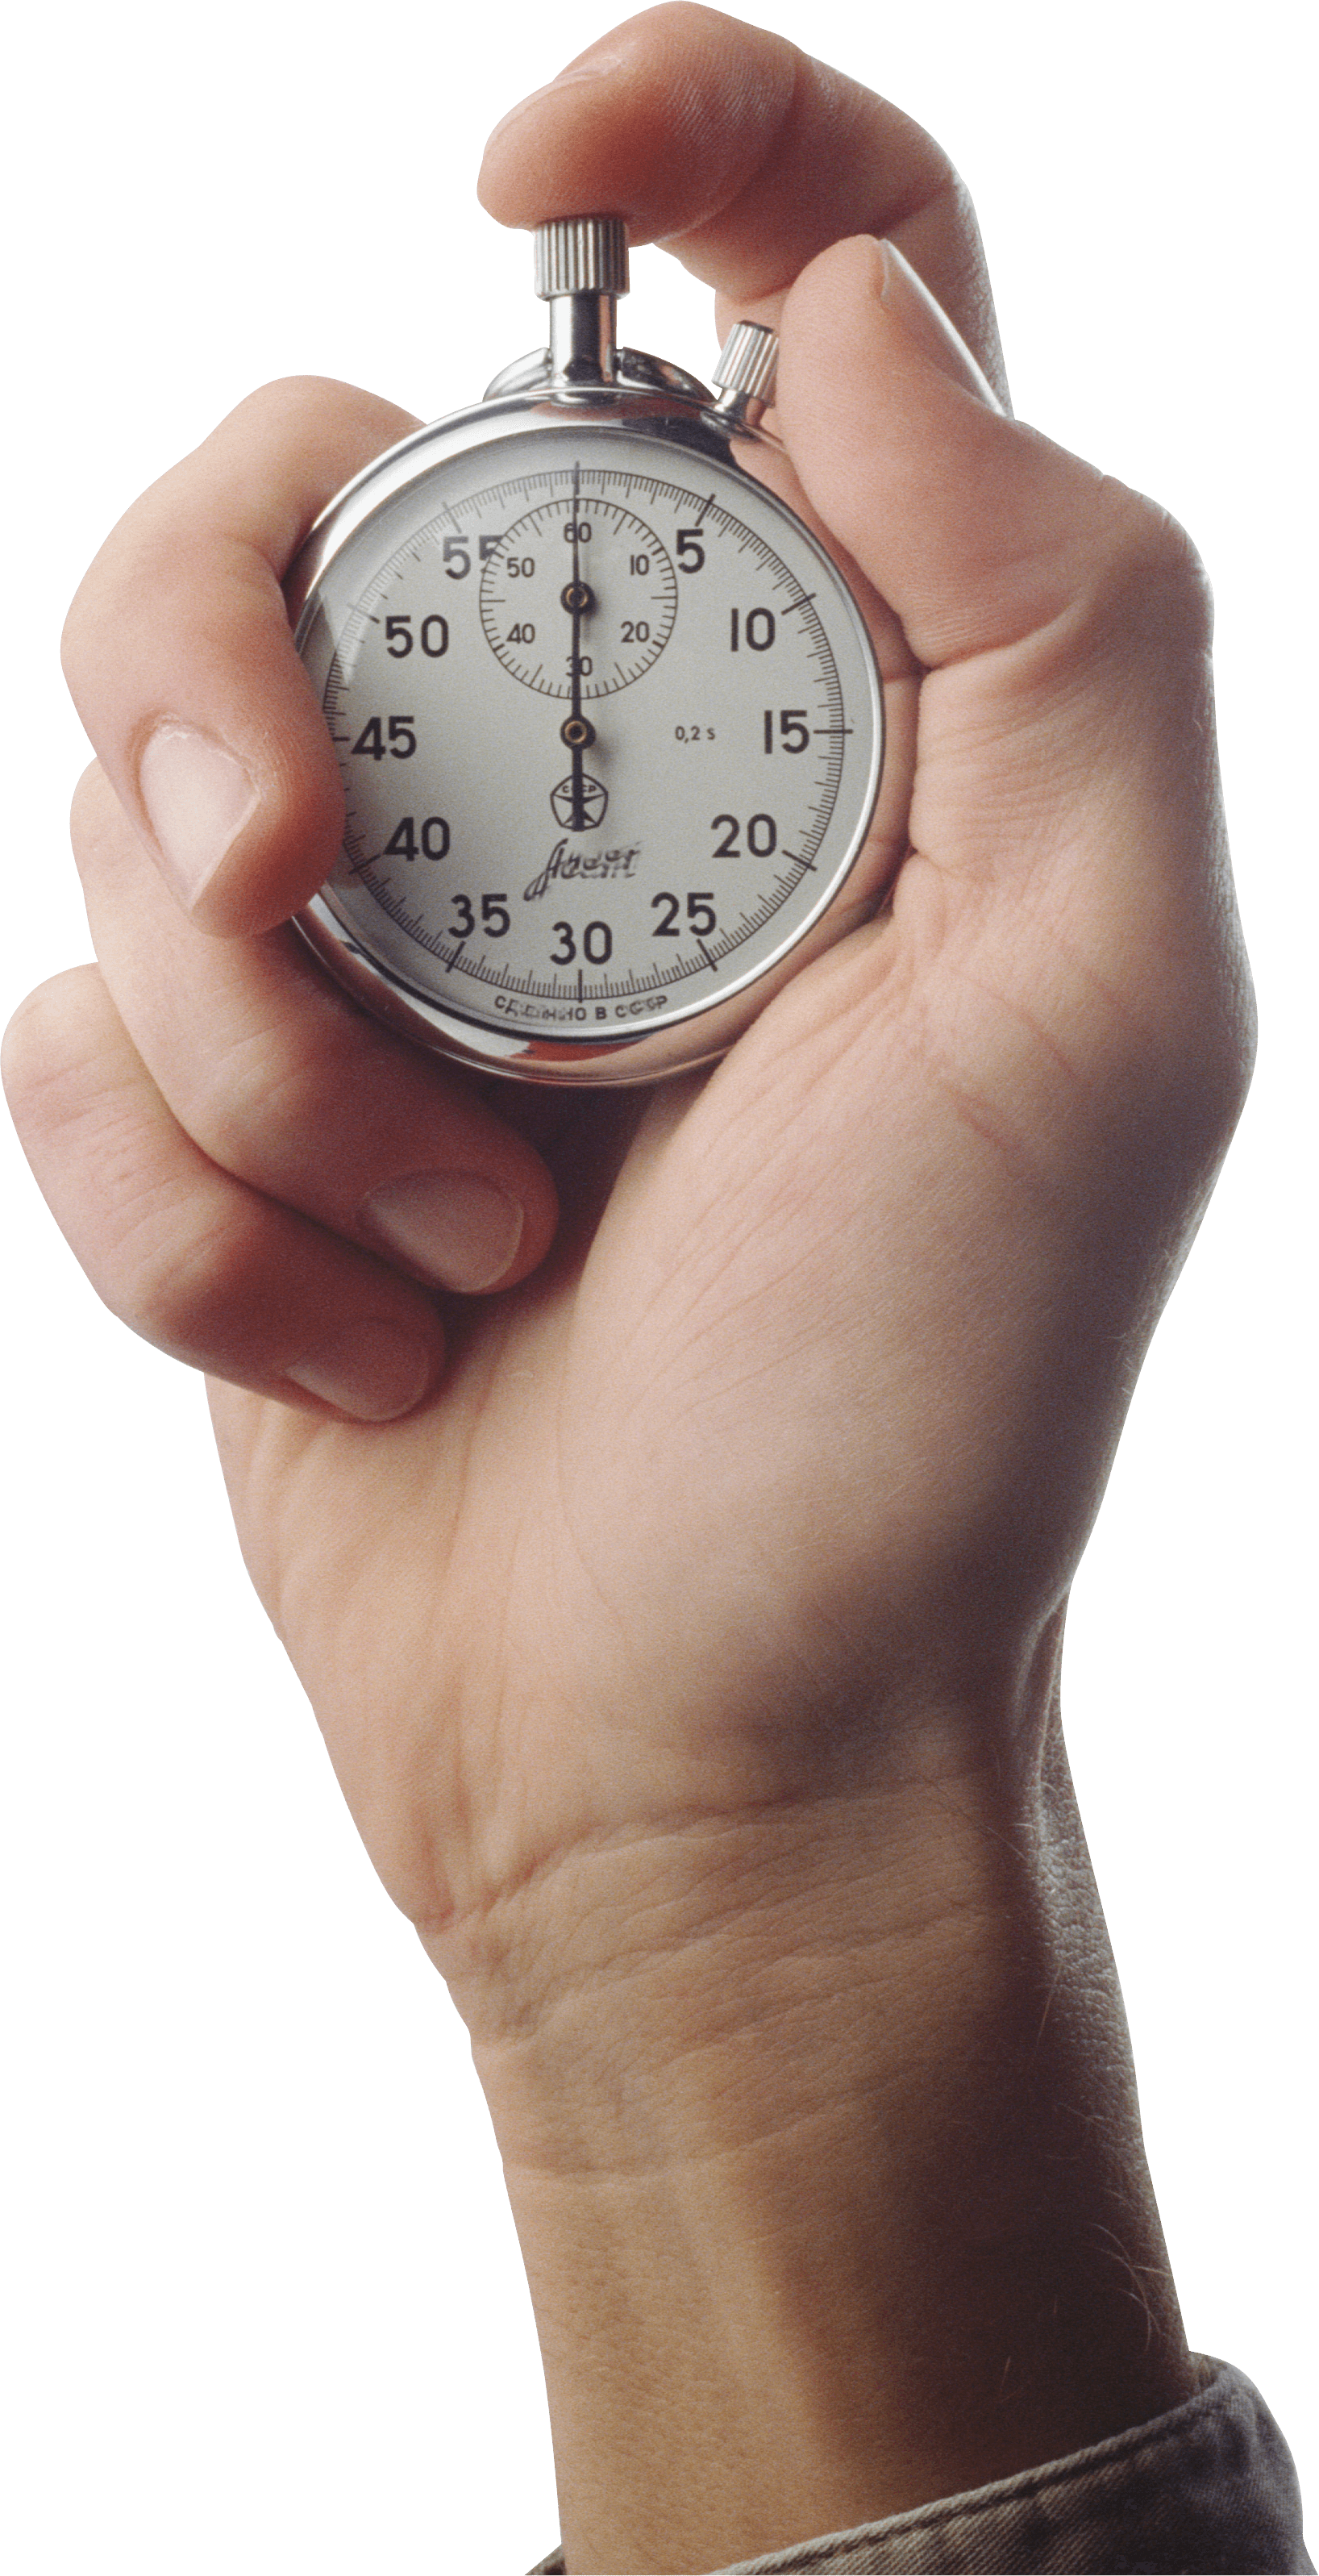 Download Stopwatch In Hand Png Image HQ PNG Image | FreePNGImg